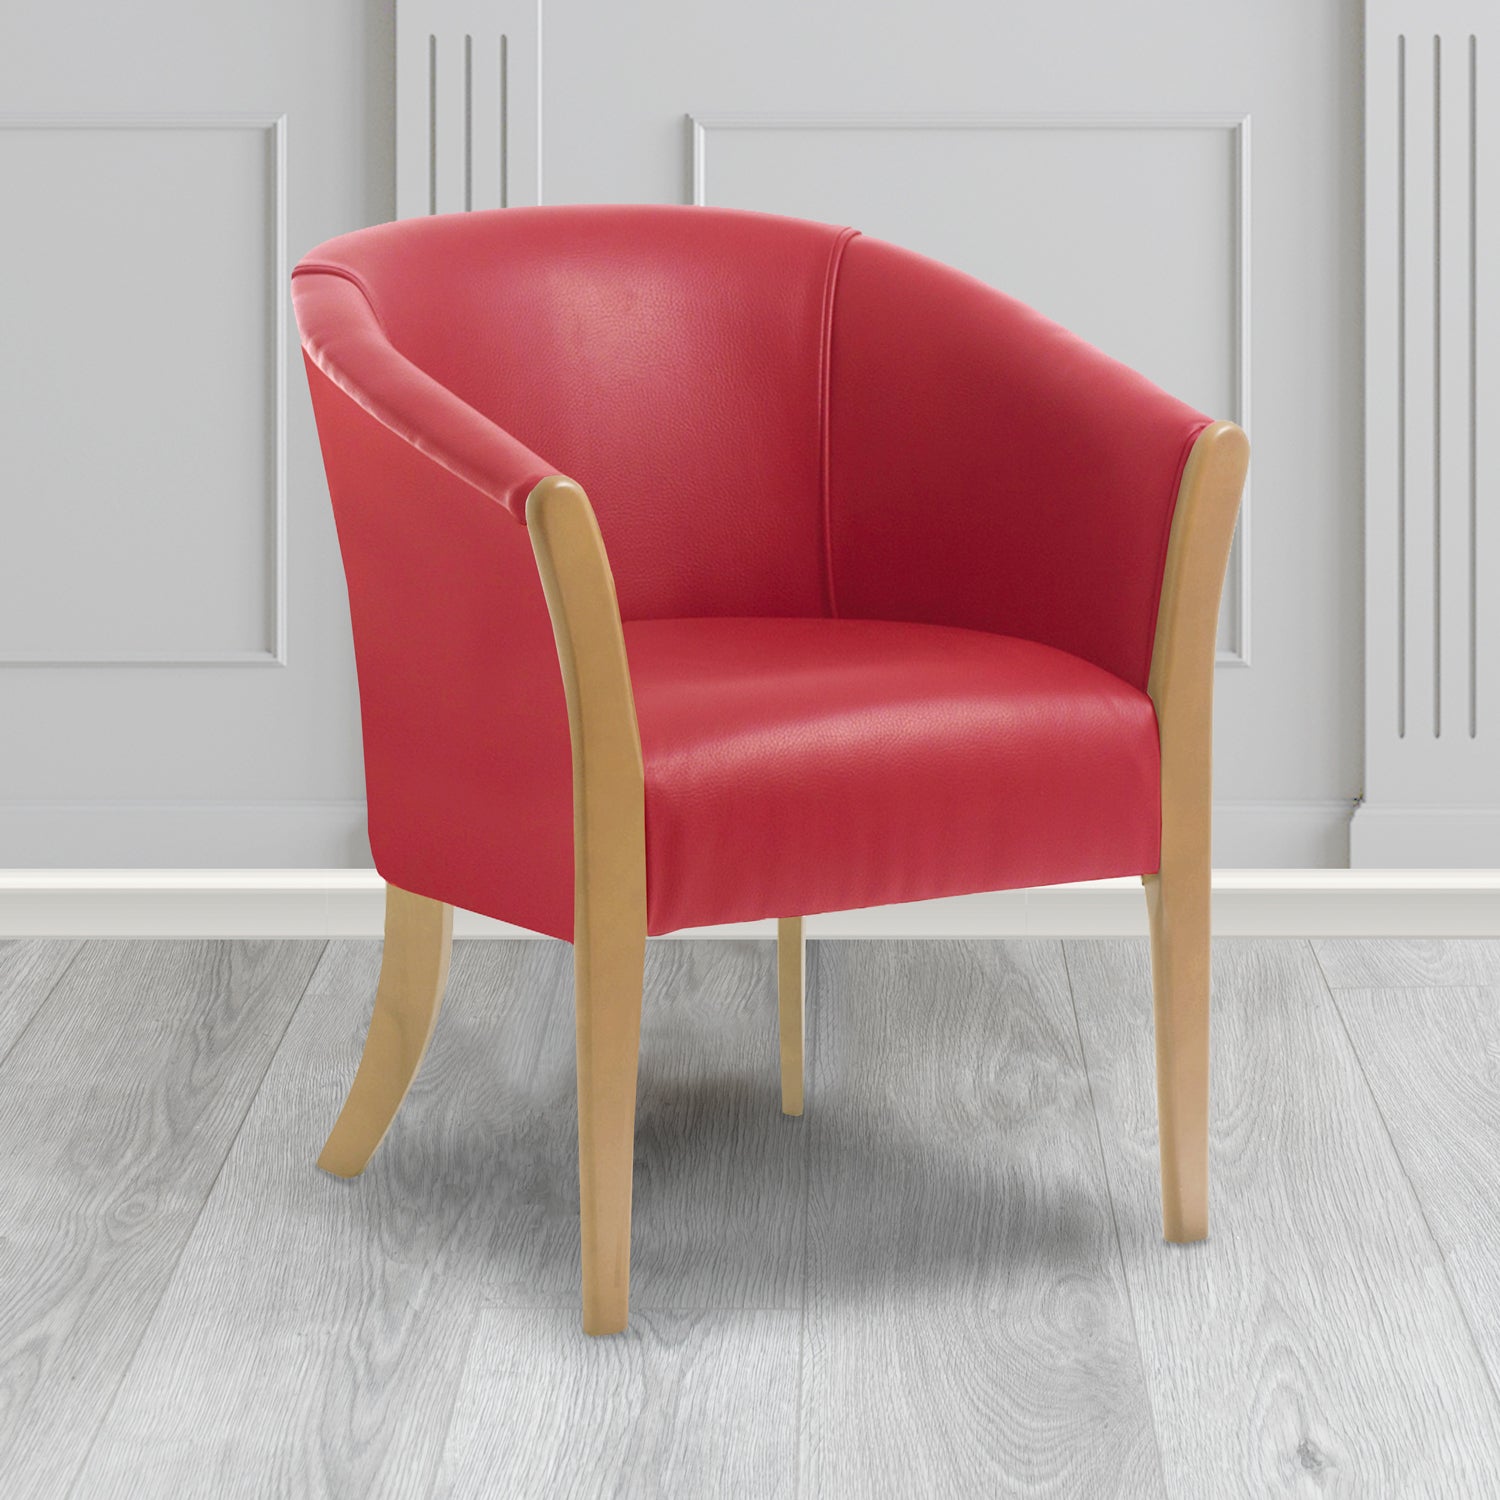 Hamilton Tub Chair in Agua Paint Pot Scarlet Crib 5 Faux Leather - Antimicrobial, Stain Resistant & Waterproof - The Tub Chair Shop